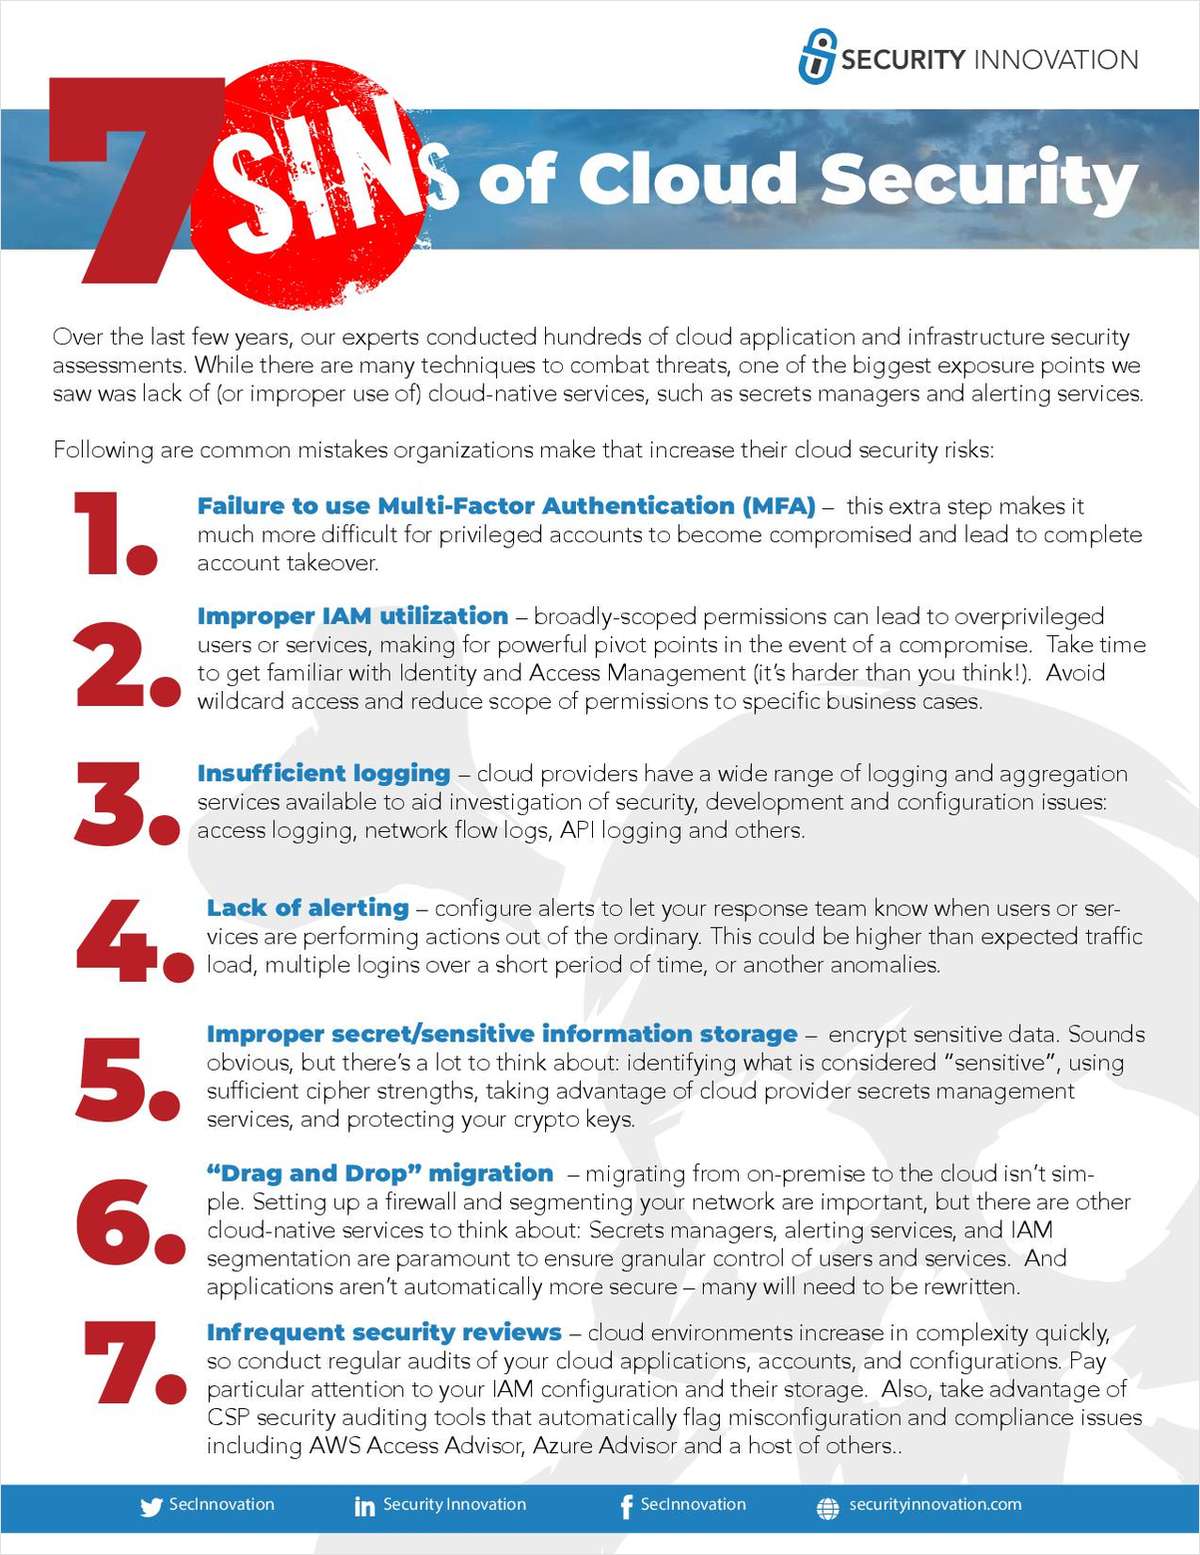 The 7 Sins of Cloud Security